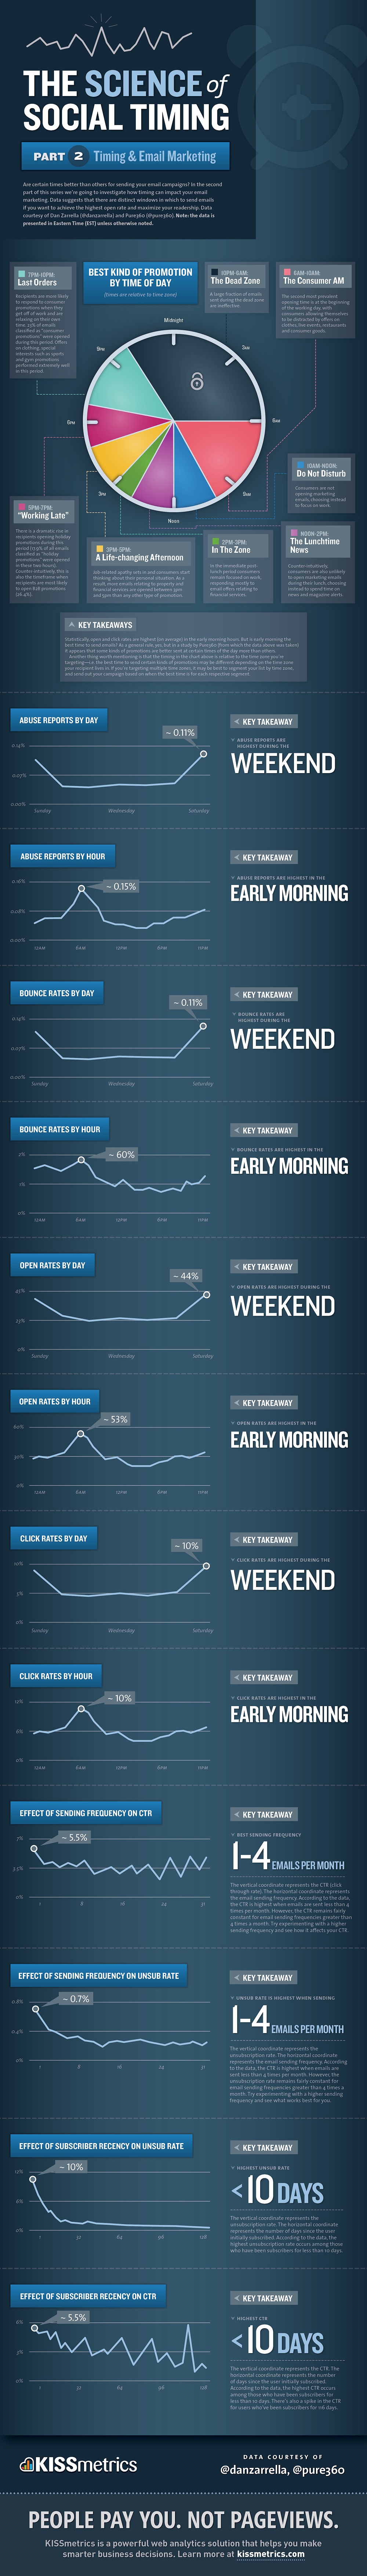 The-Science-Of-Social-Timing-In-Email-Marketing-infographic